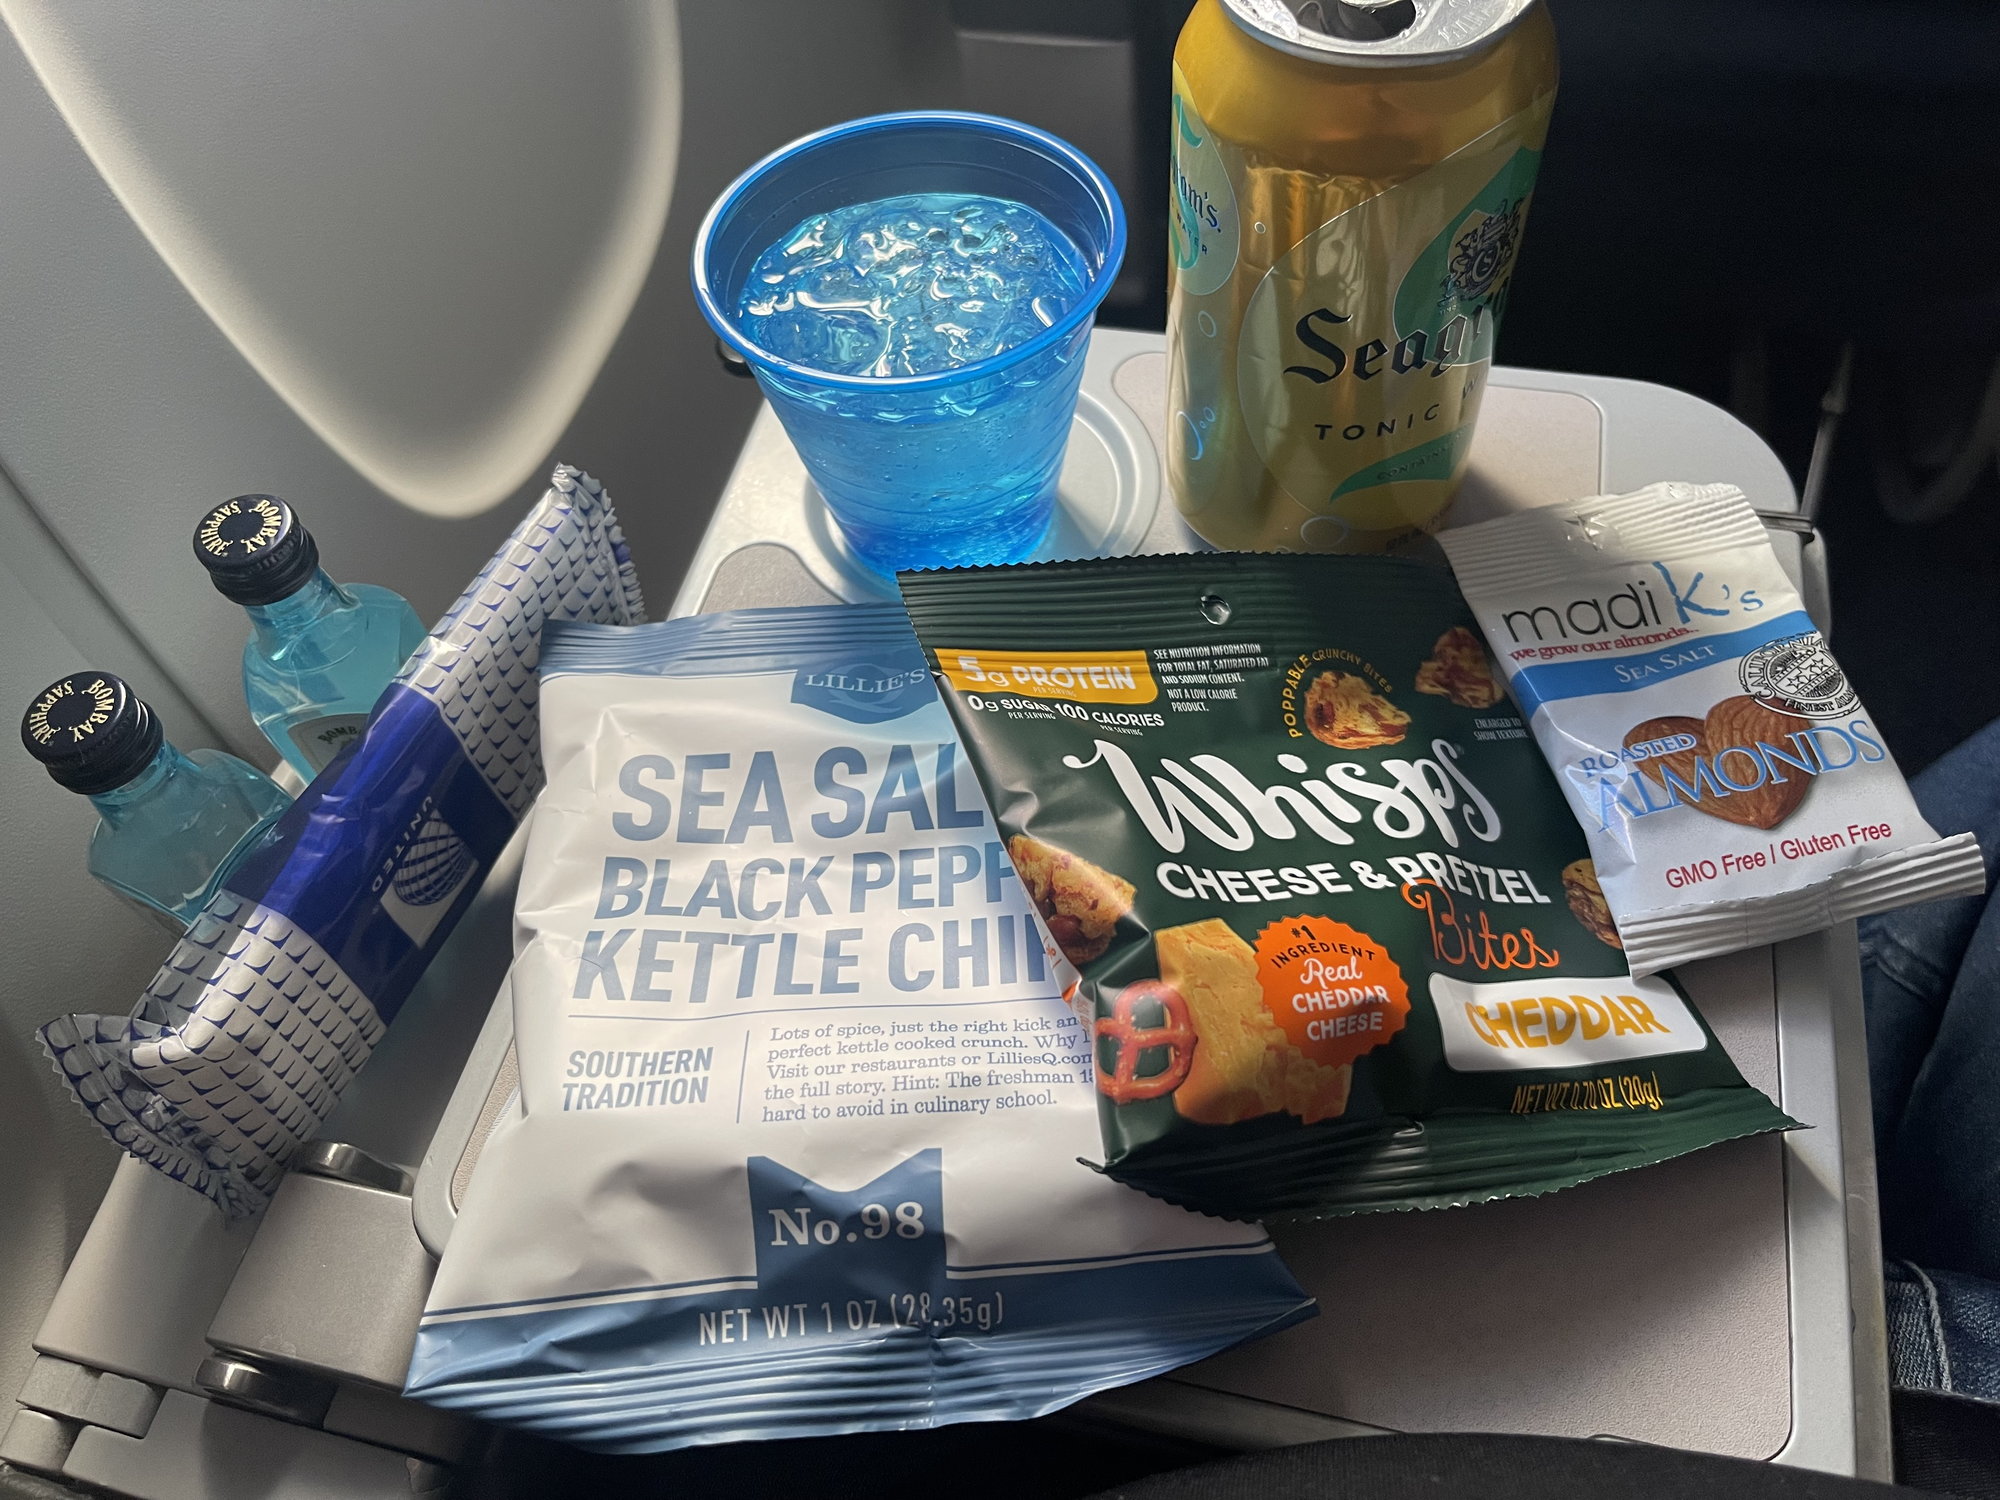 Kid's Snackbox On United Airlines - Live and Let's Fly